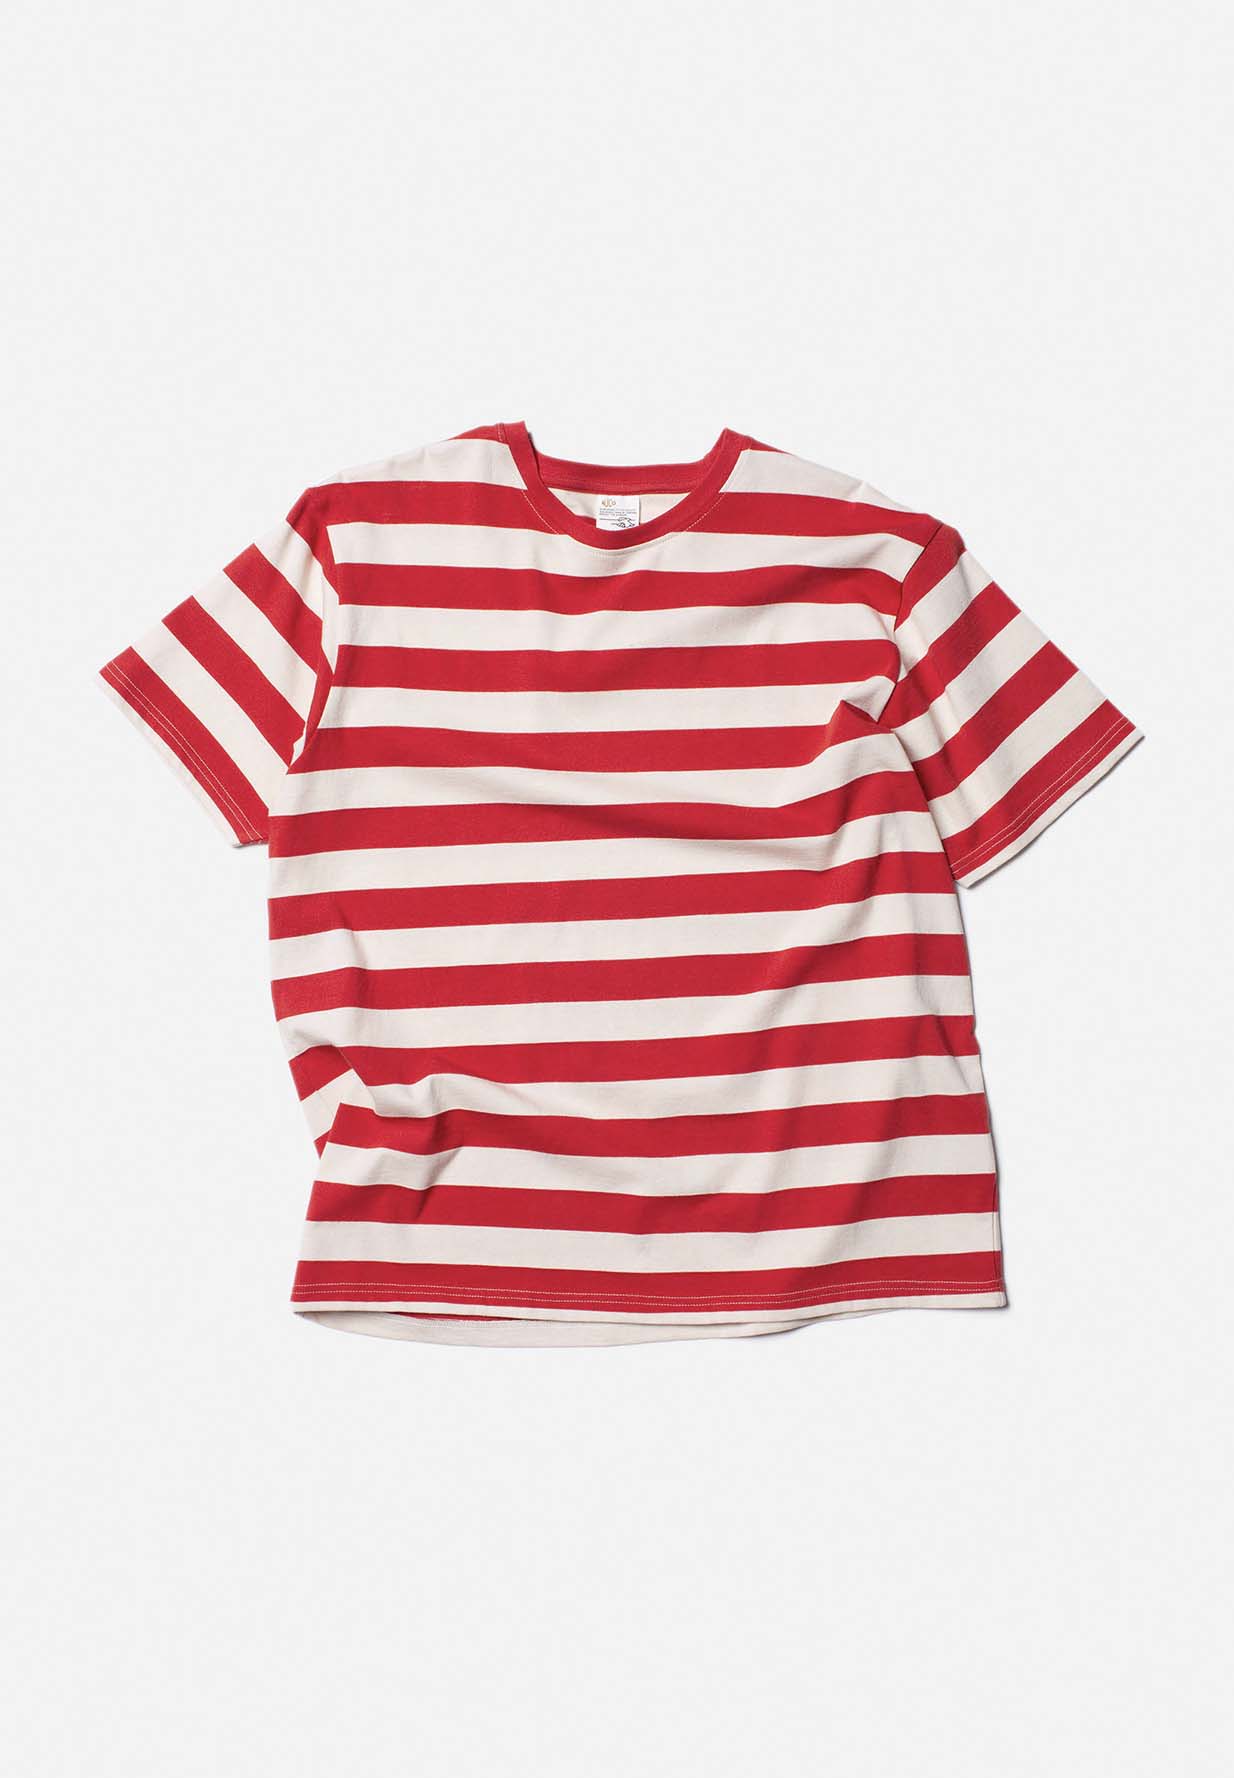 NUDIE JEANS T-Shirt Uno Block Stripe offwhite/red M